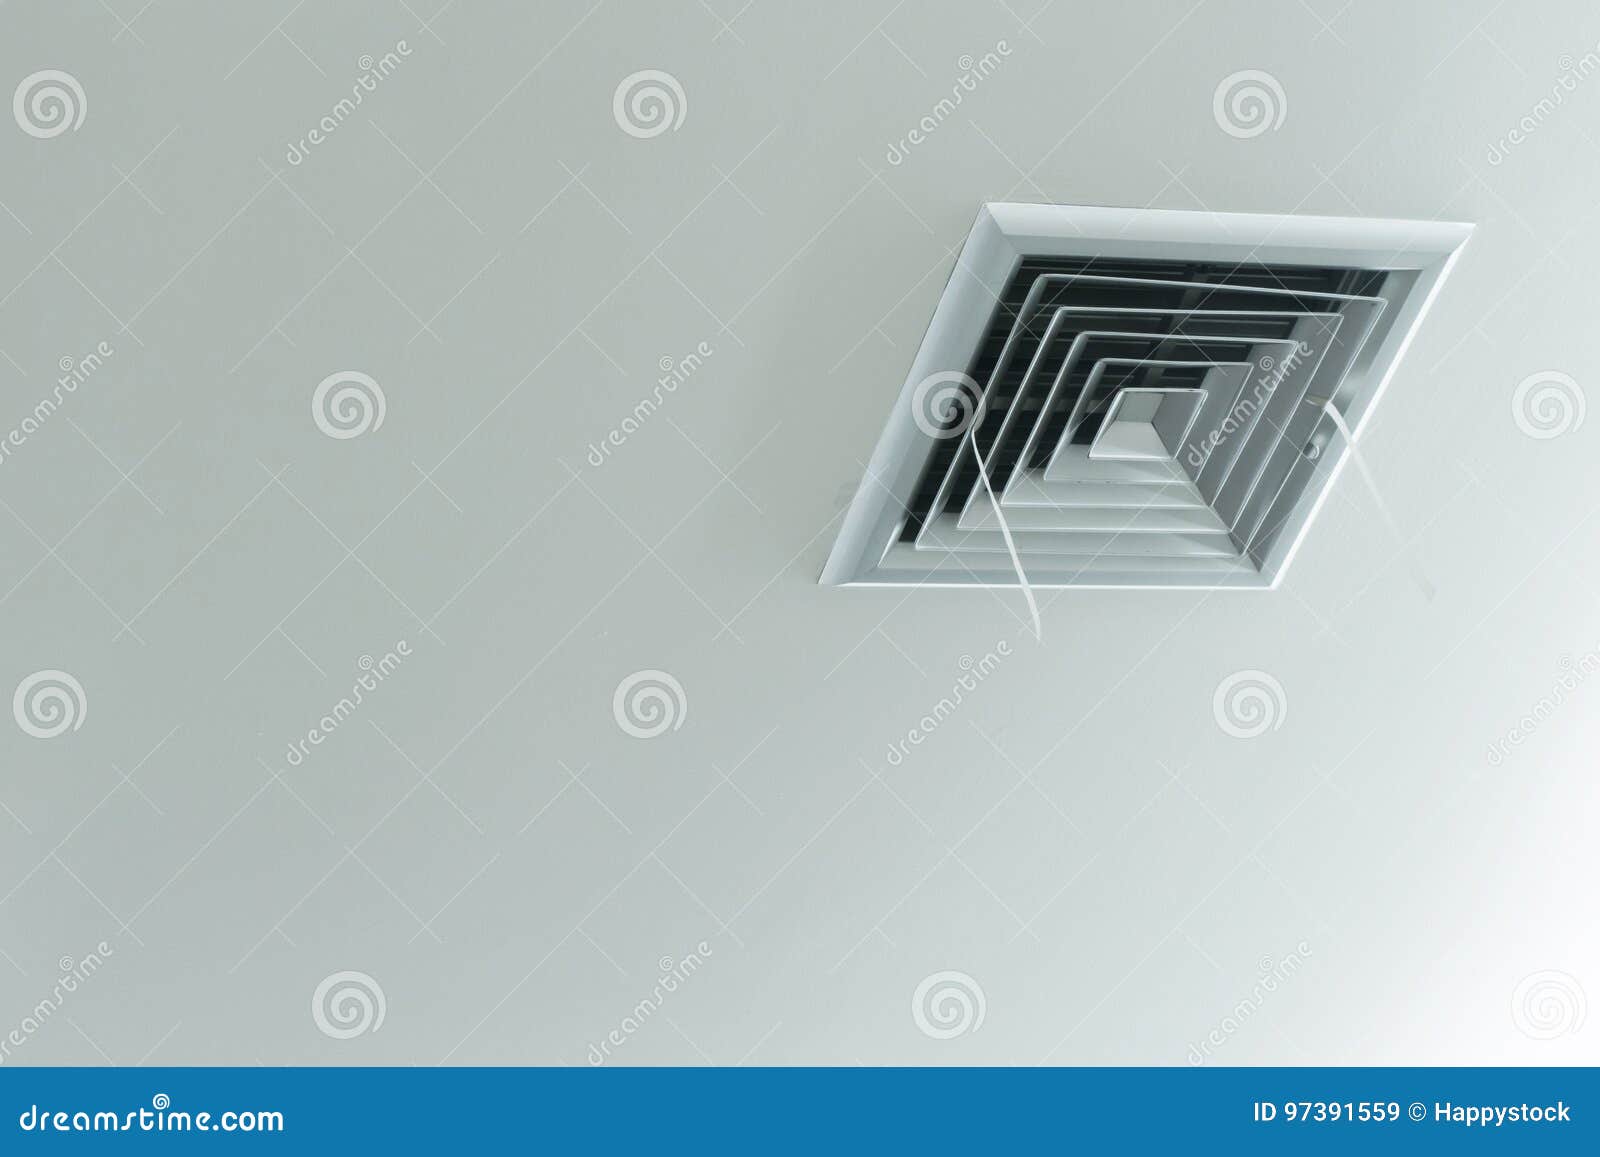 Grille Of Air Conditioner System Under Ceiling Stock Image